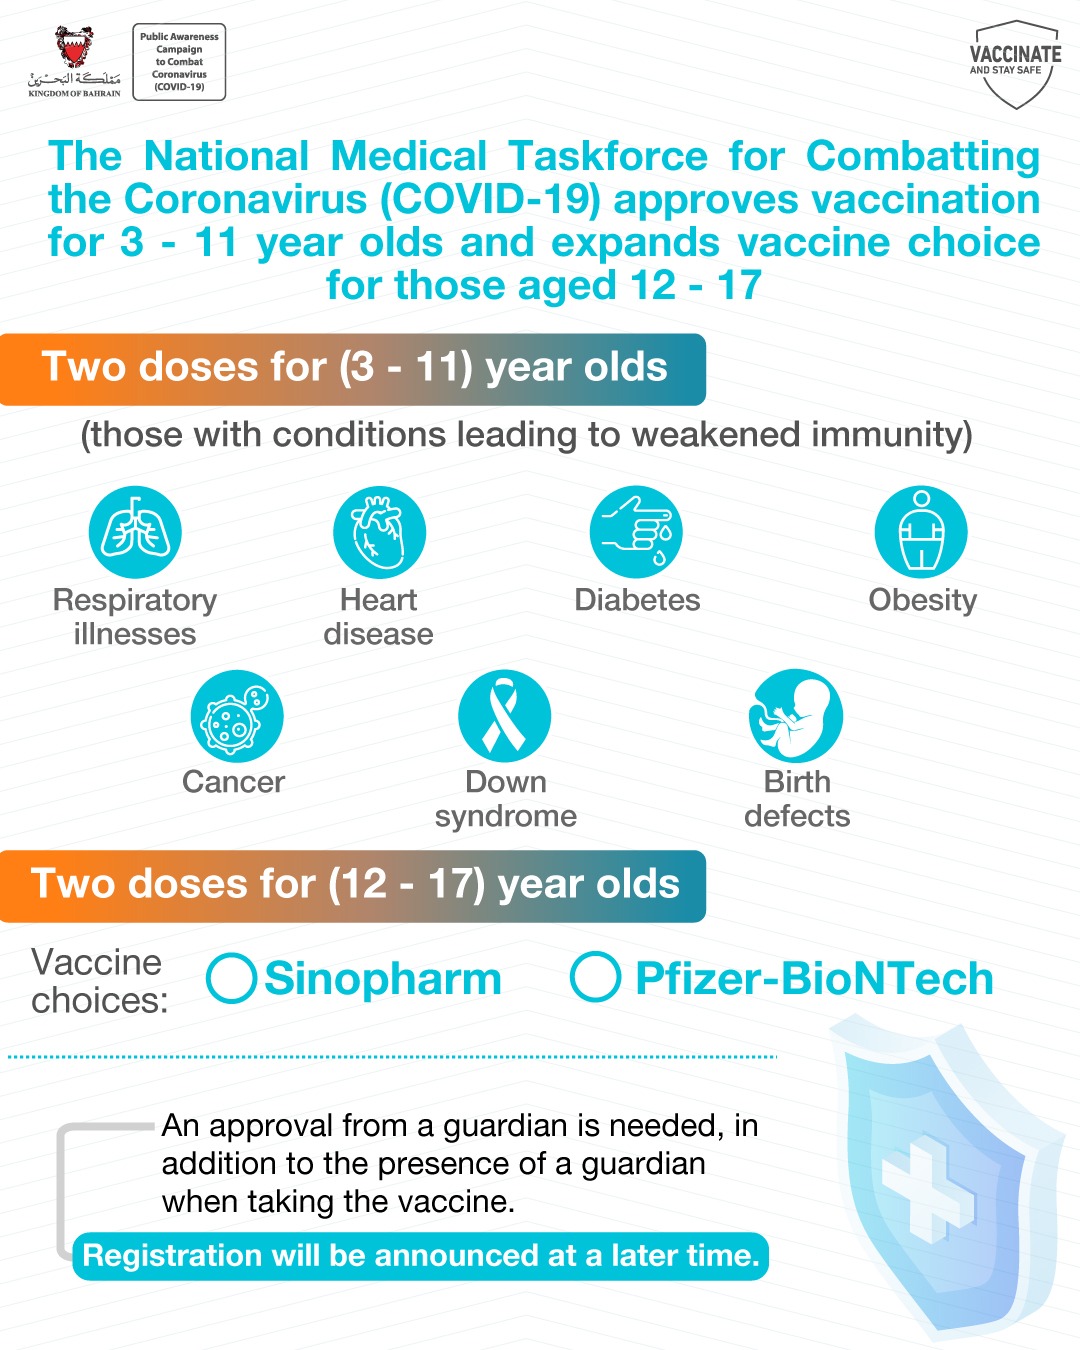 COVID-19 Taskforce approves vaccination for 3-11 year olds and expands vaccine choice for those aged 12-17